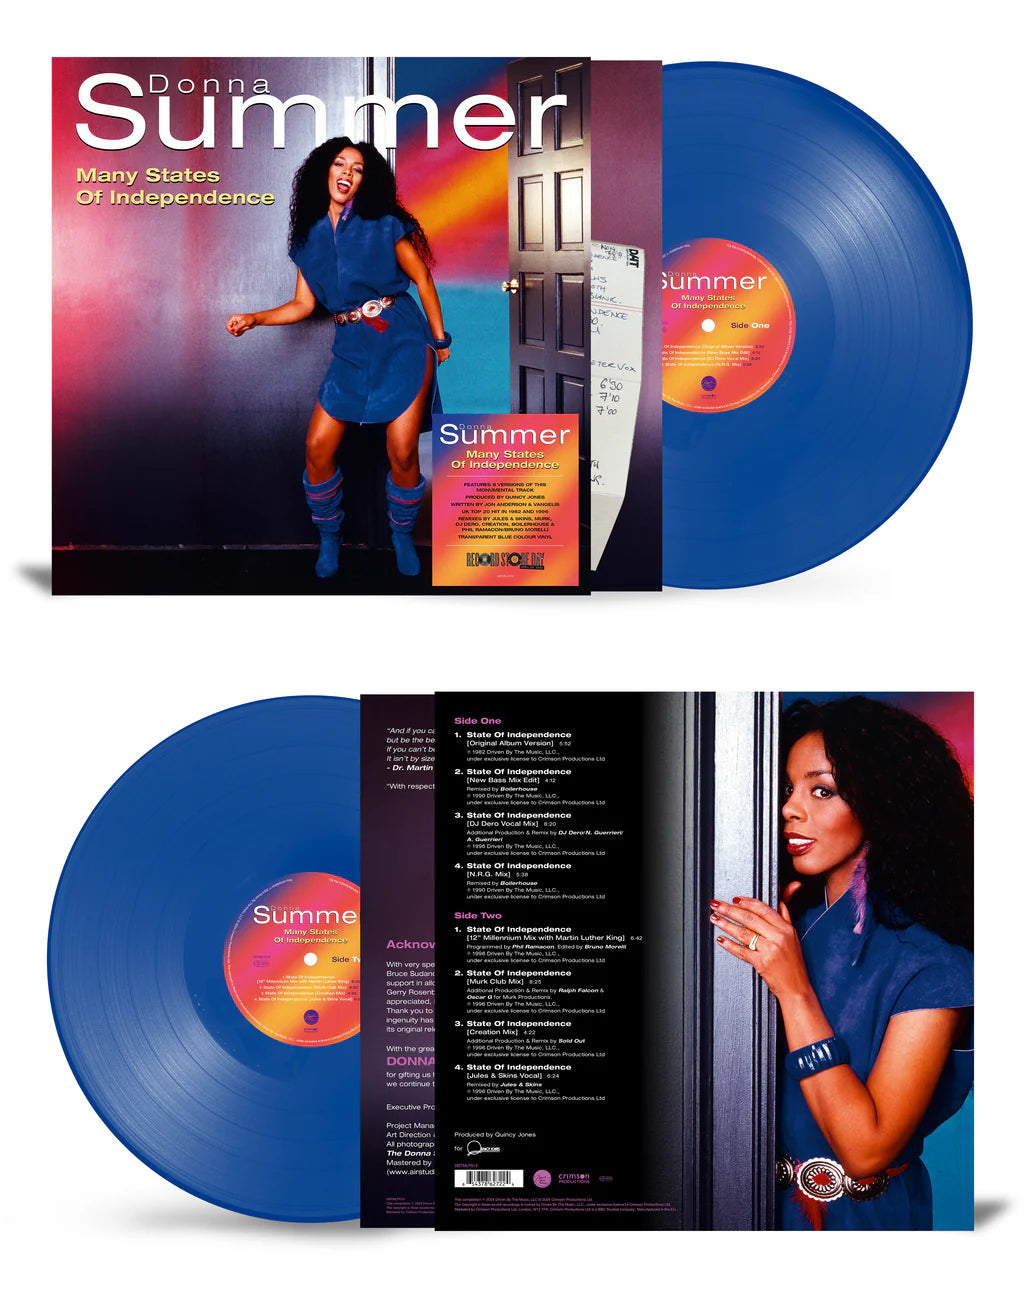 Donna Summer - Many States Of Independence: Limited Translucent Blue Vinyl LP [RSD24]